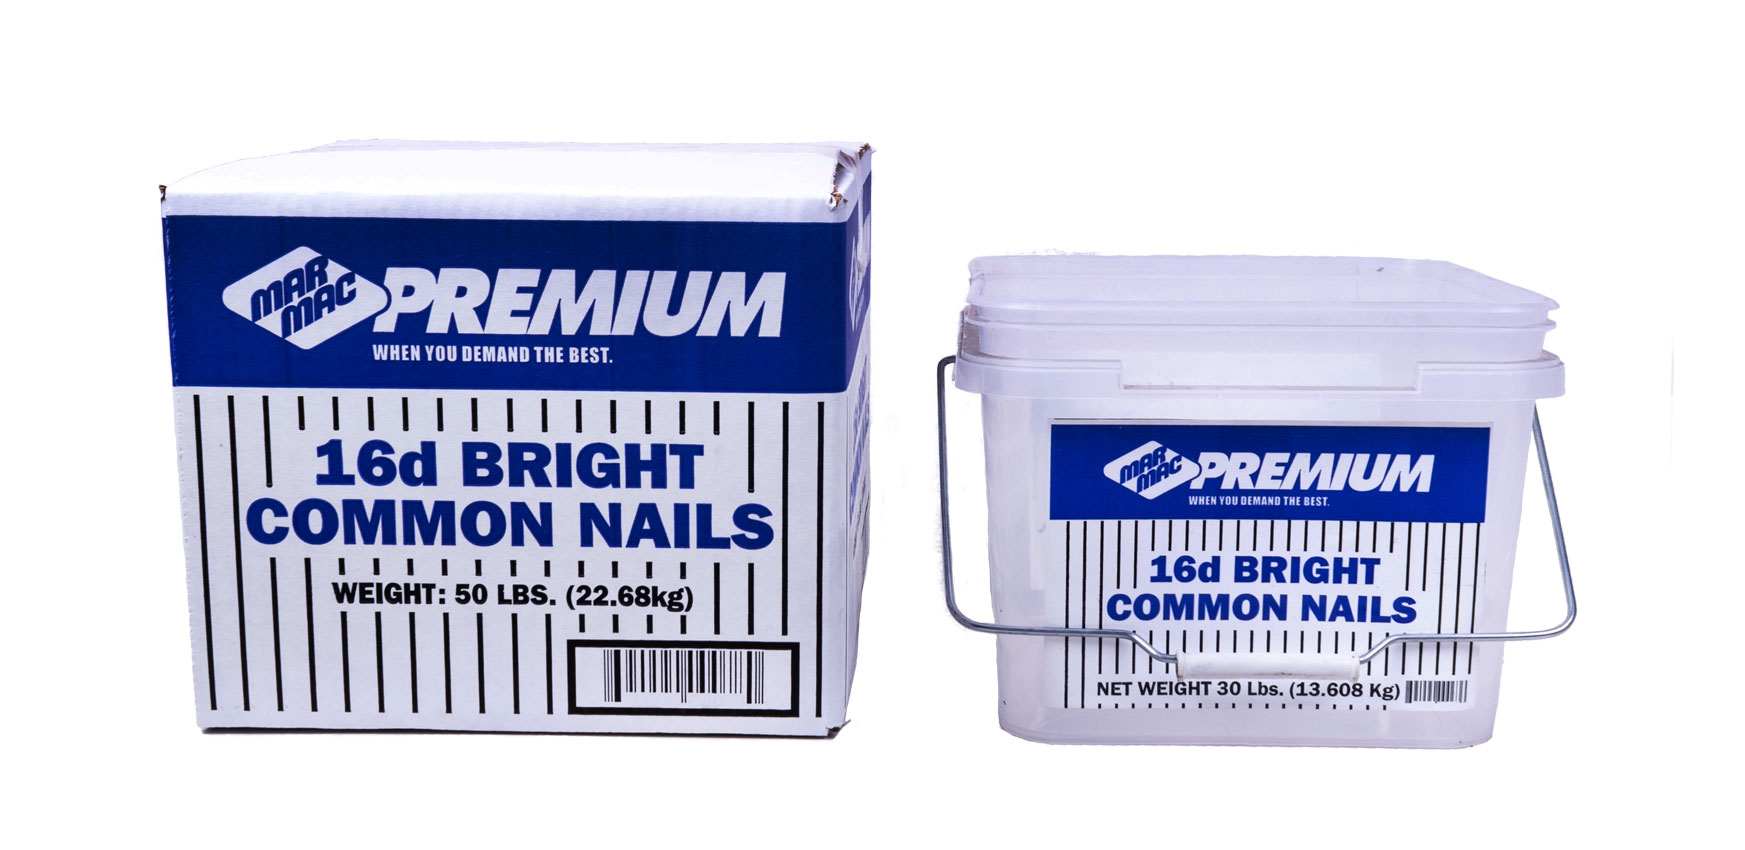 Common Nails Packaging